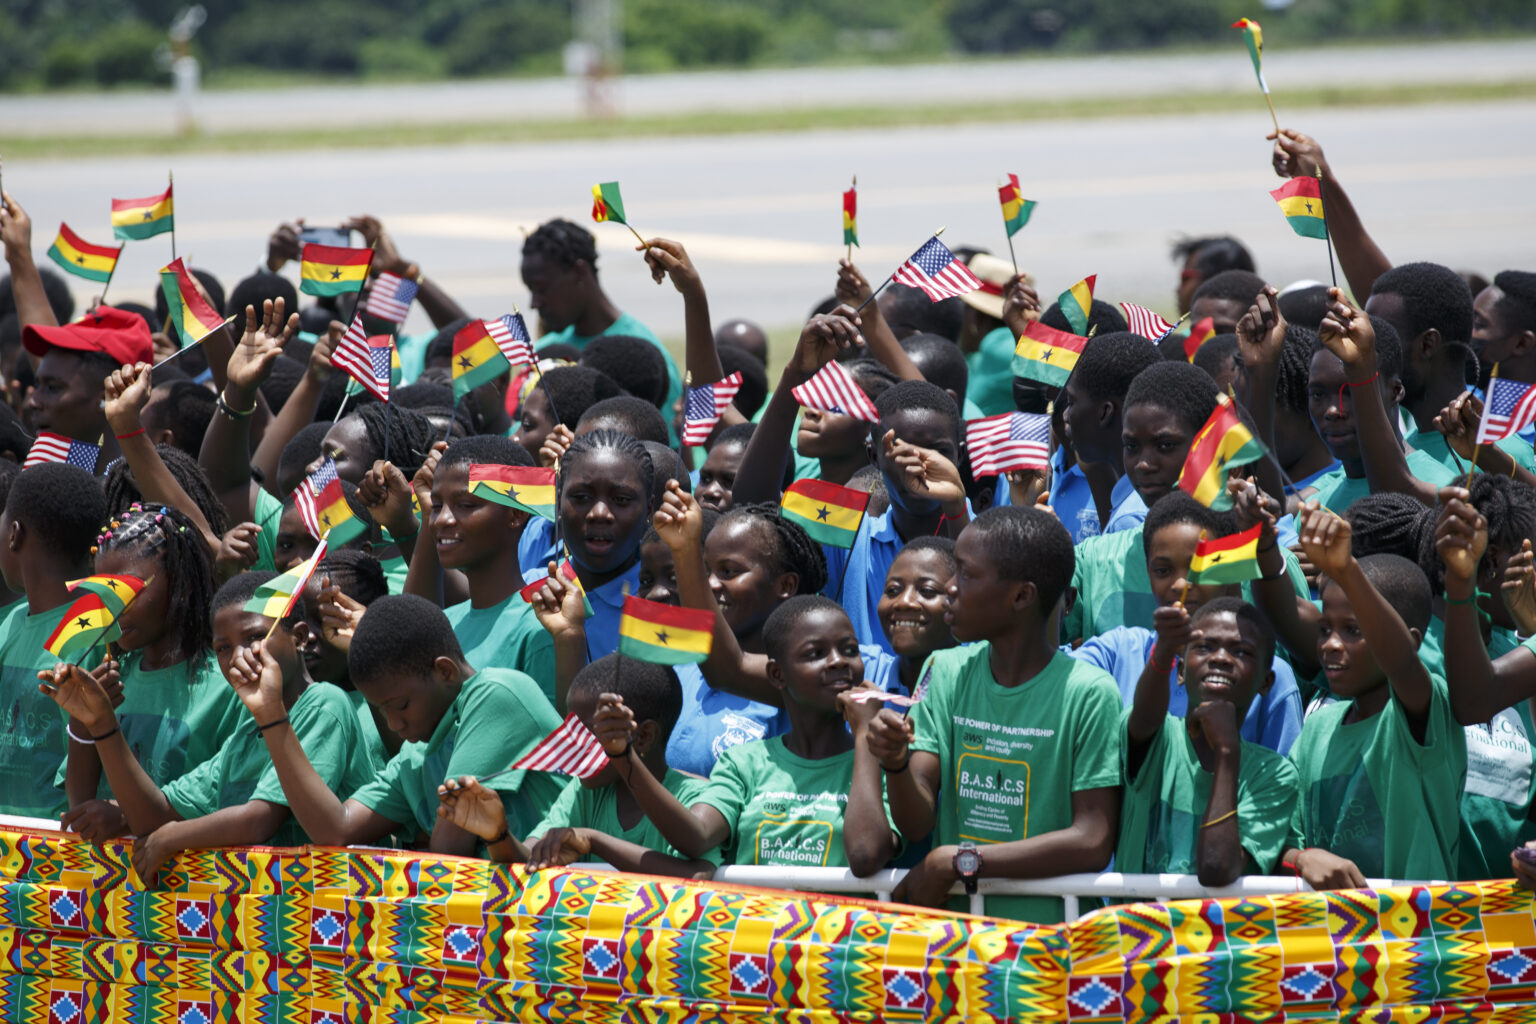 Ghanaian schoolchildren wait to greet Vice President Kamala Harris at Kotoka International Airport in Accra, Ghana, on Sunday, March 26, 2023. Harris is completing a seven-day African visit that will also take her to Tanzania and Zambia. Photo credit: Misper Apawu, The Associated Press